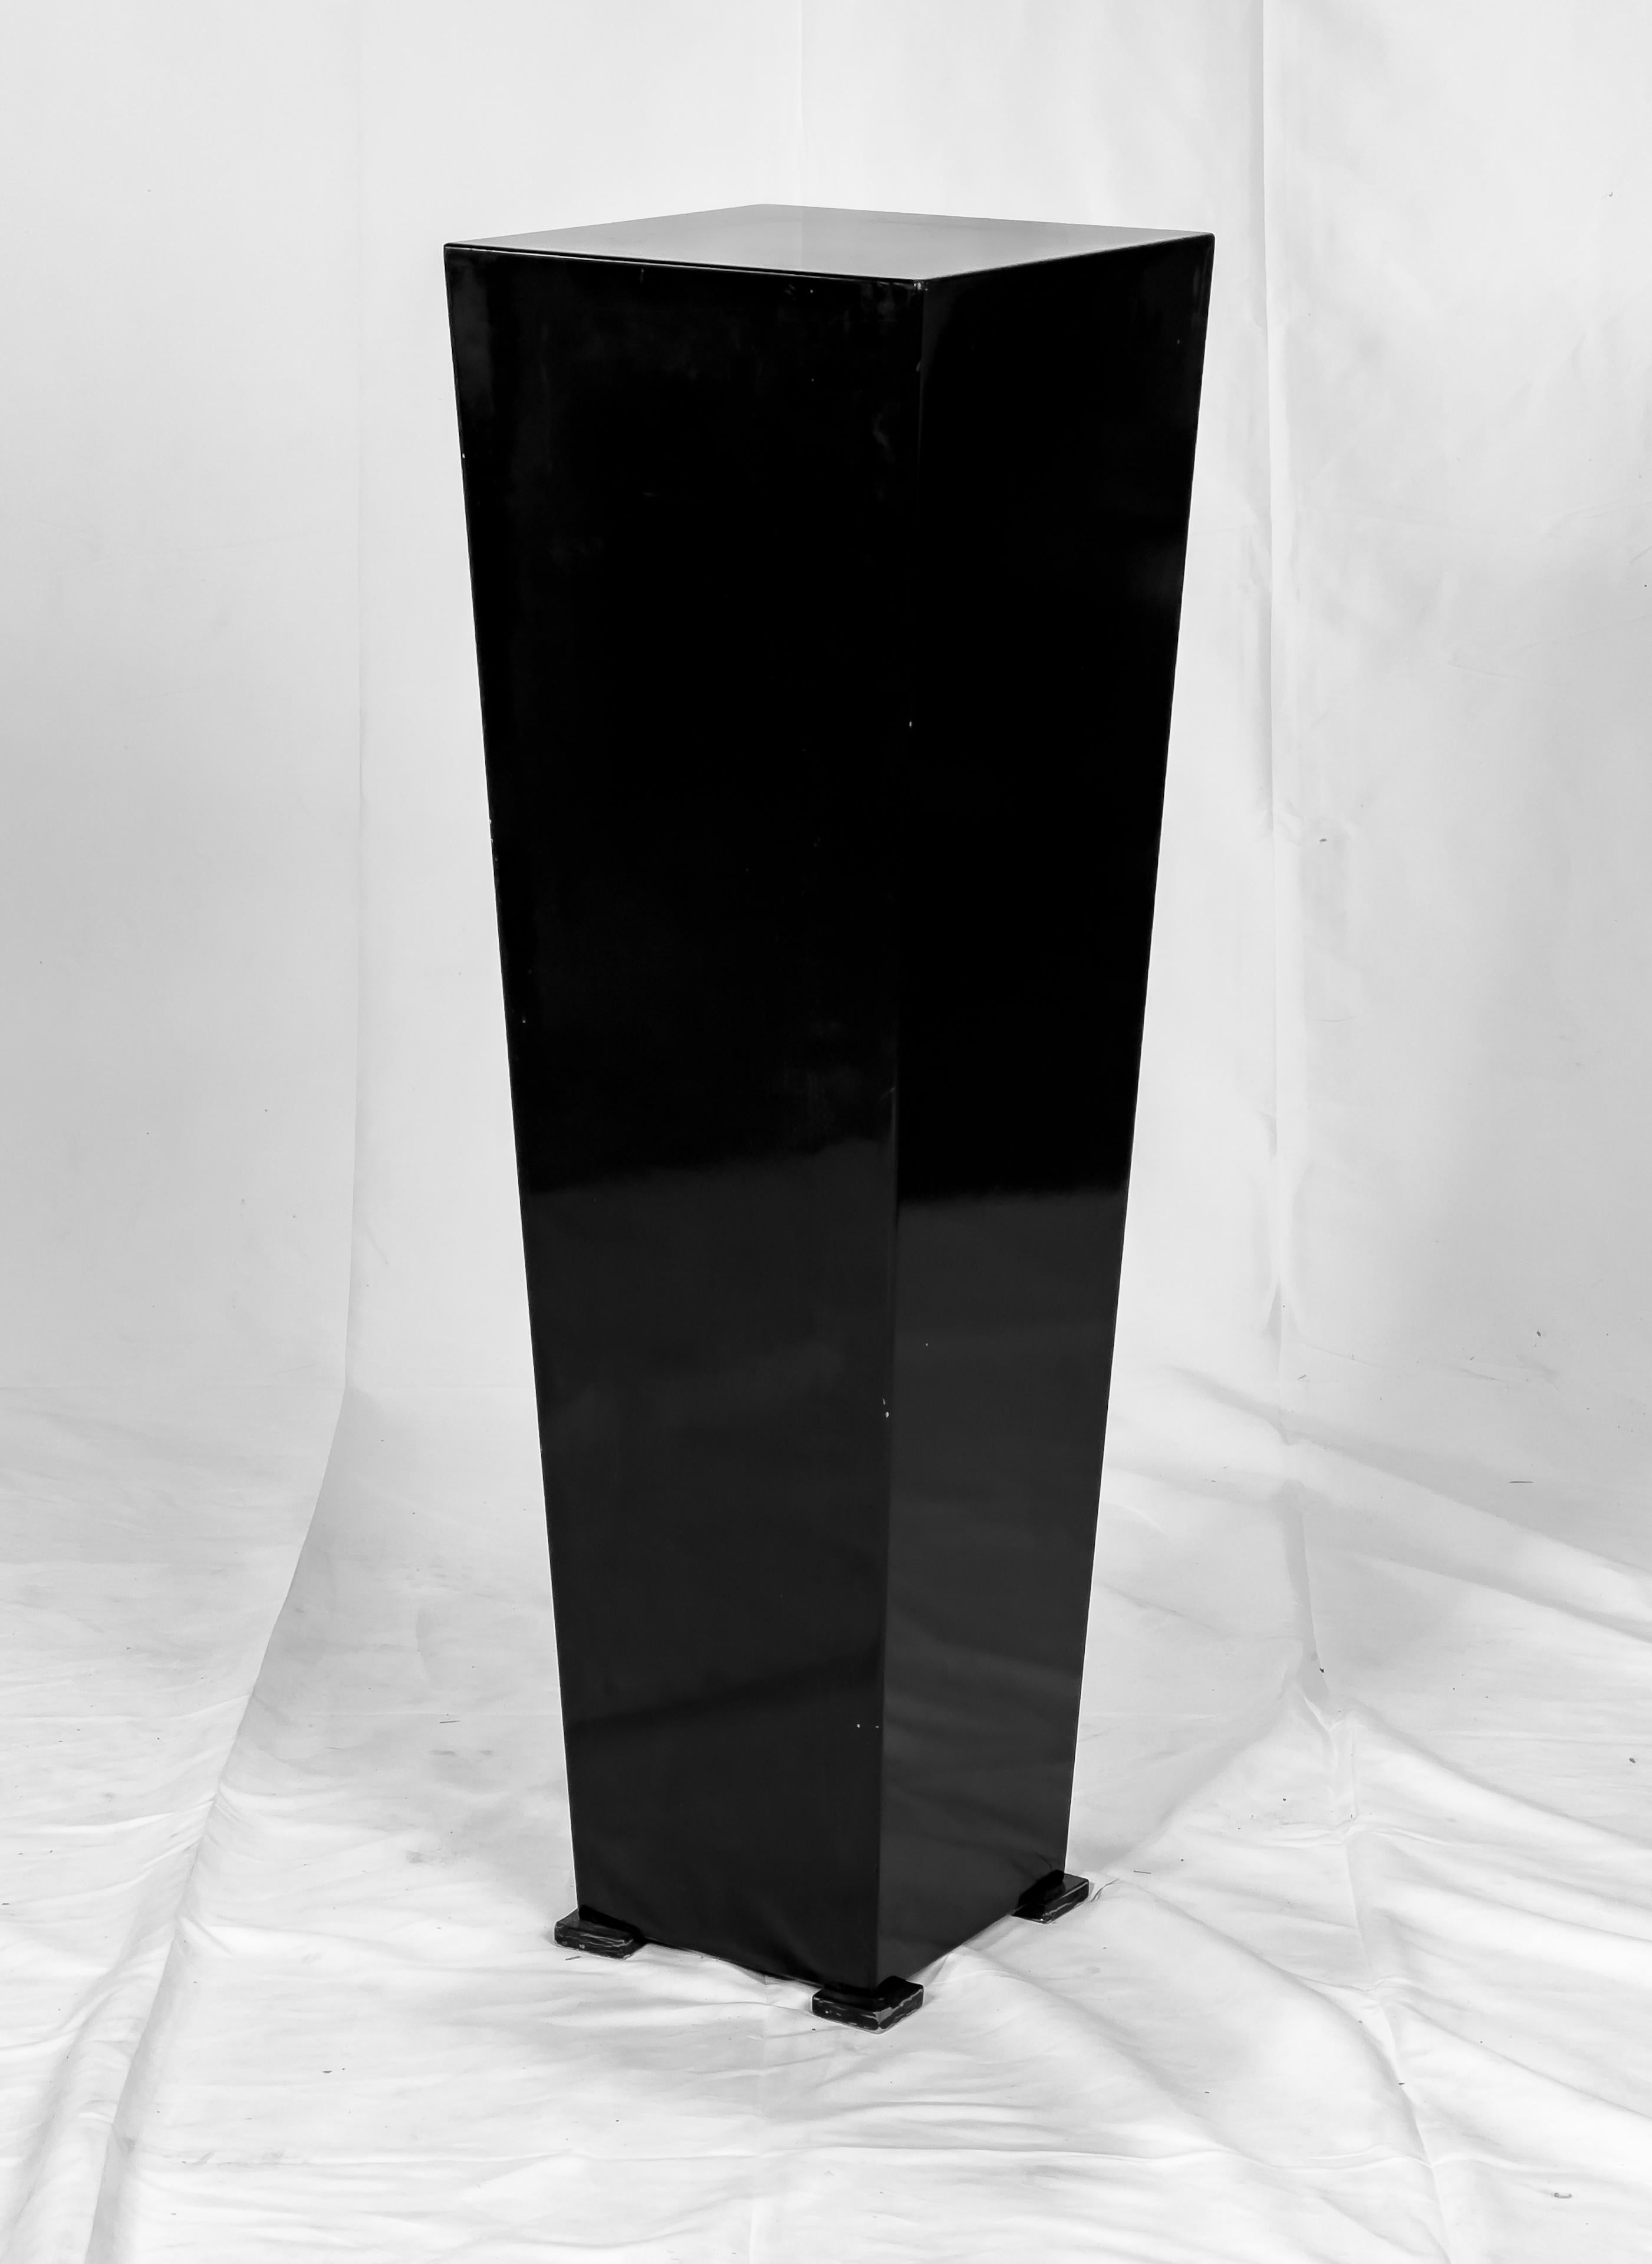 Dark Reflections a sculpture by Mac Whitney (b. 1936) a respected Texas artist most widely noted for his monumental sculptures. The piece is a black polished acrylic sculpture of an abstract form on a plinth base and signed with conjoined initials,